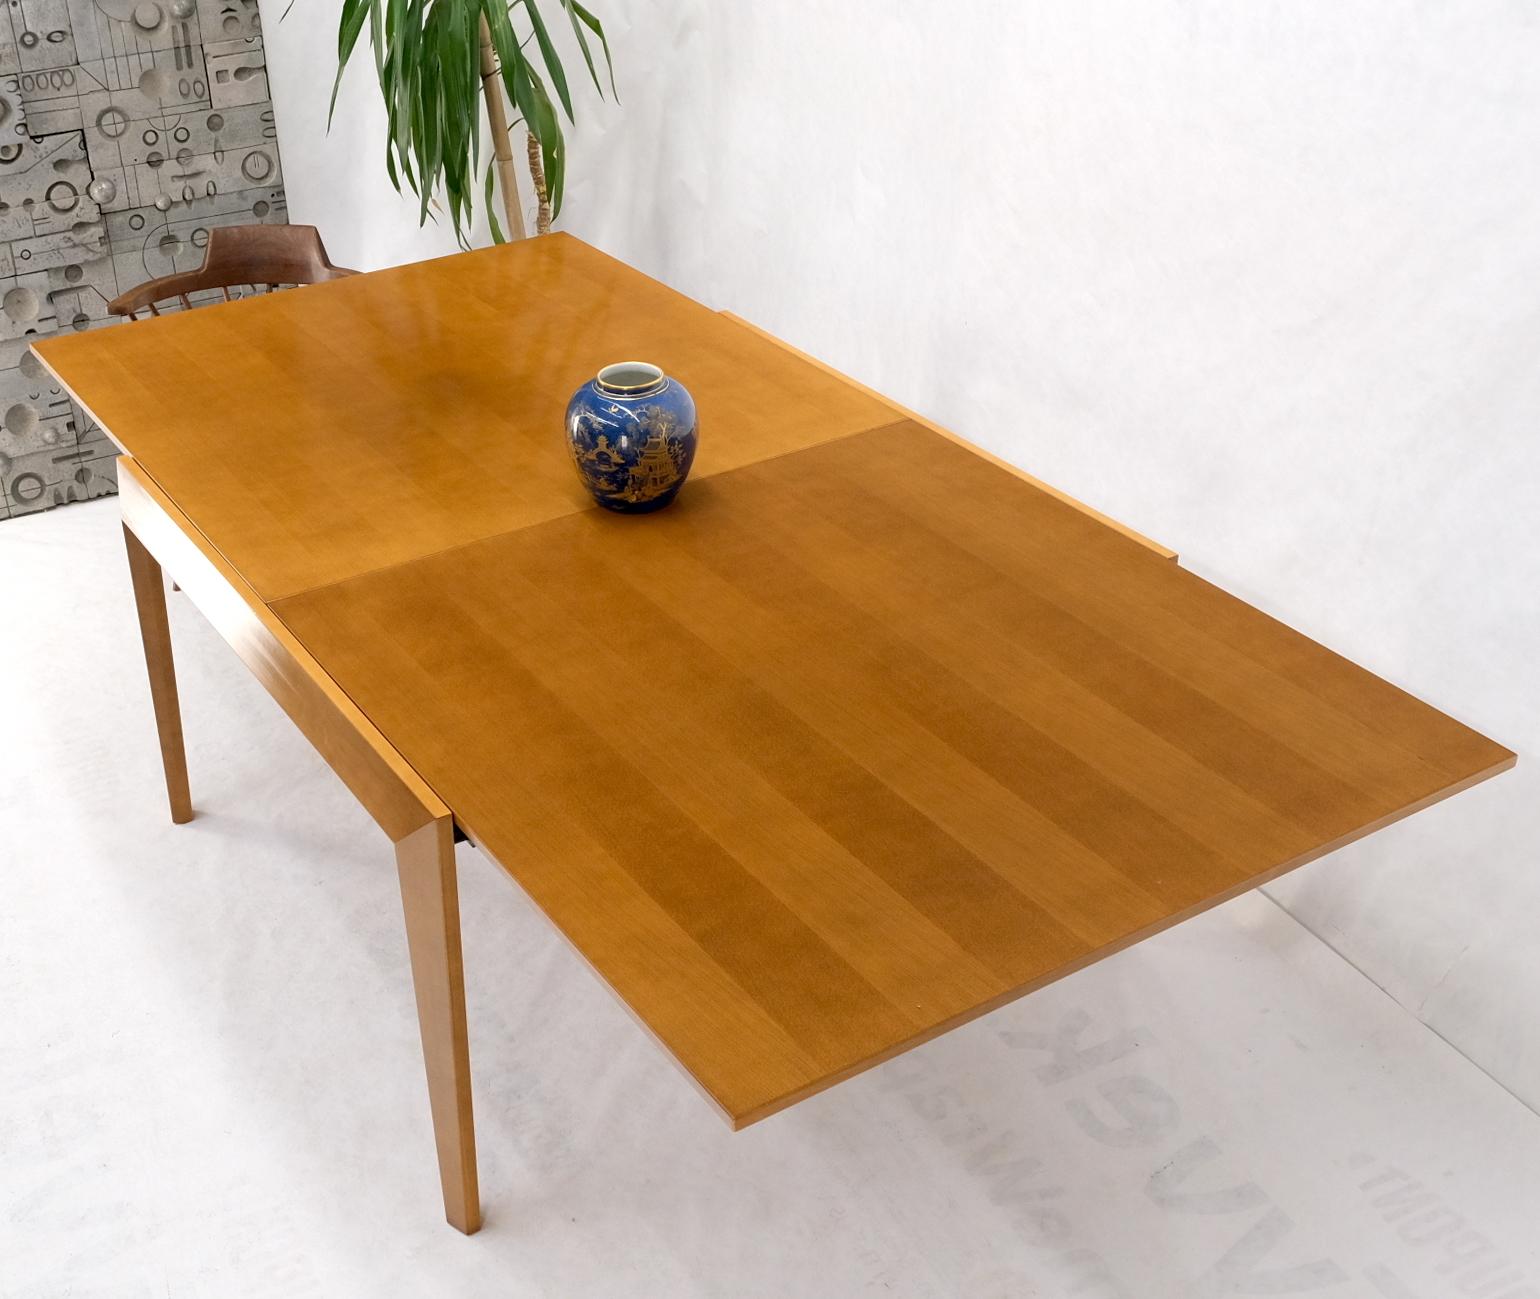 Cassina Large Square Flip Top Expandable Dining Conference Table Blond Birch In Good Condition For Sale In Rockaway, NJ